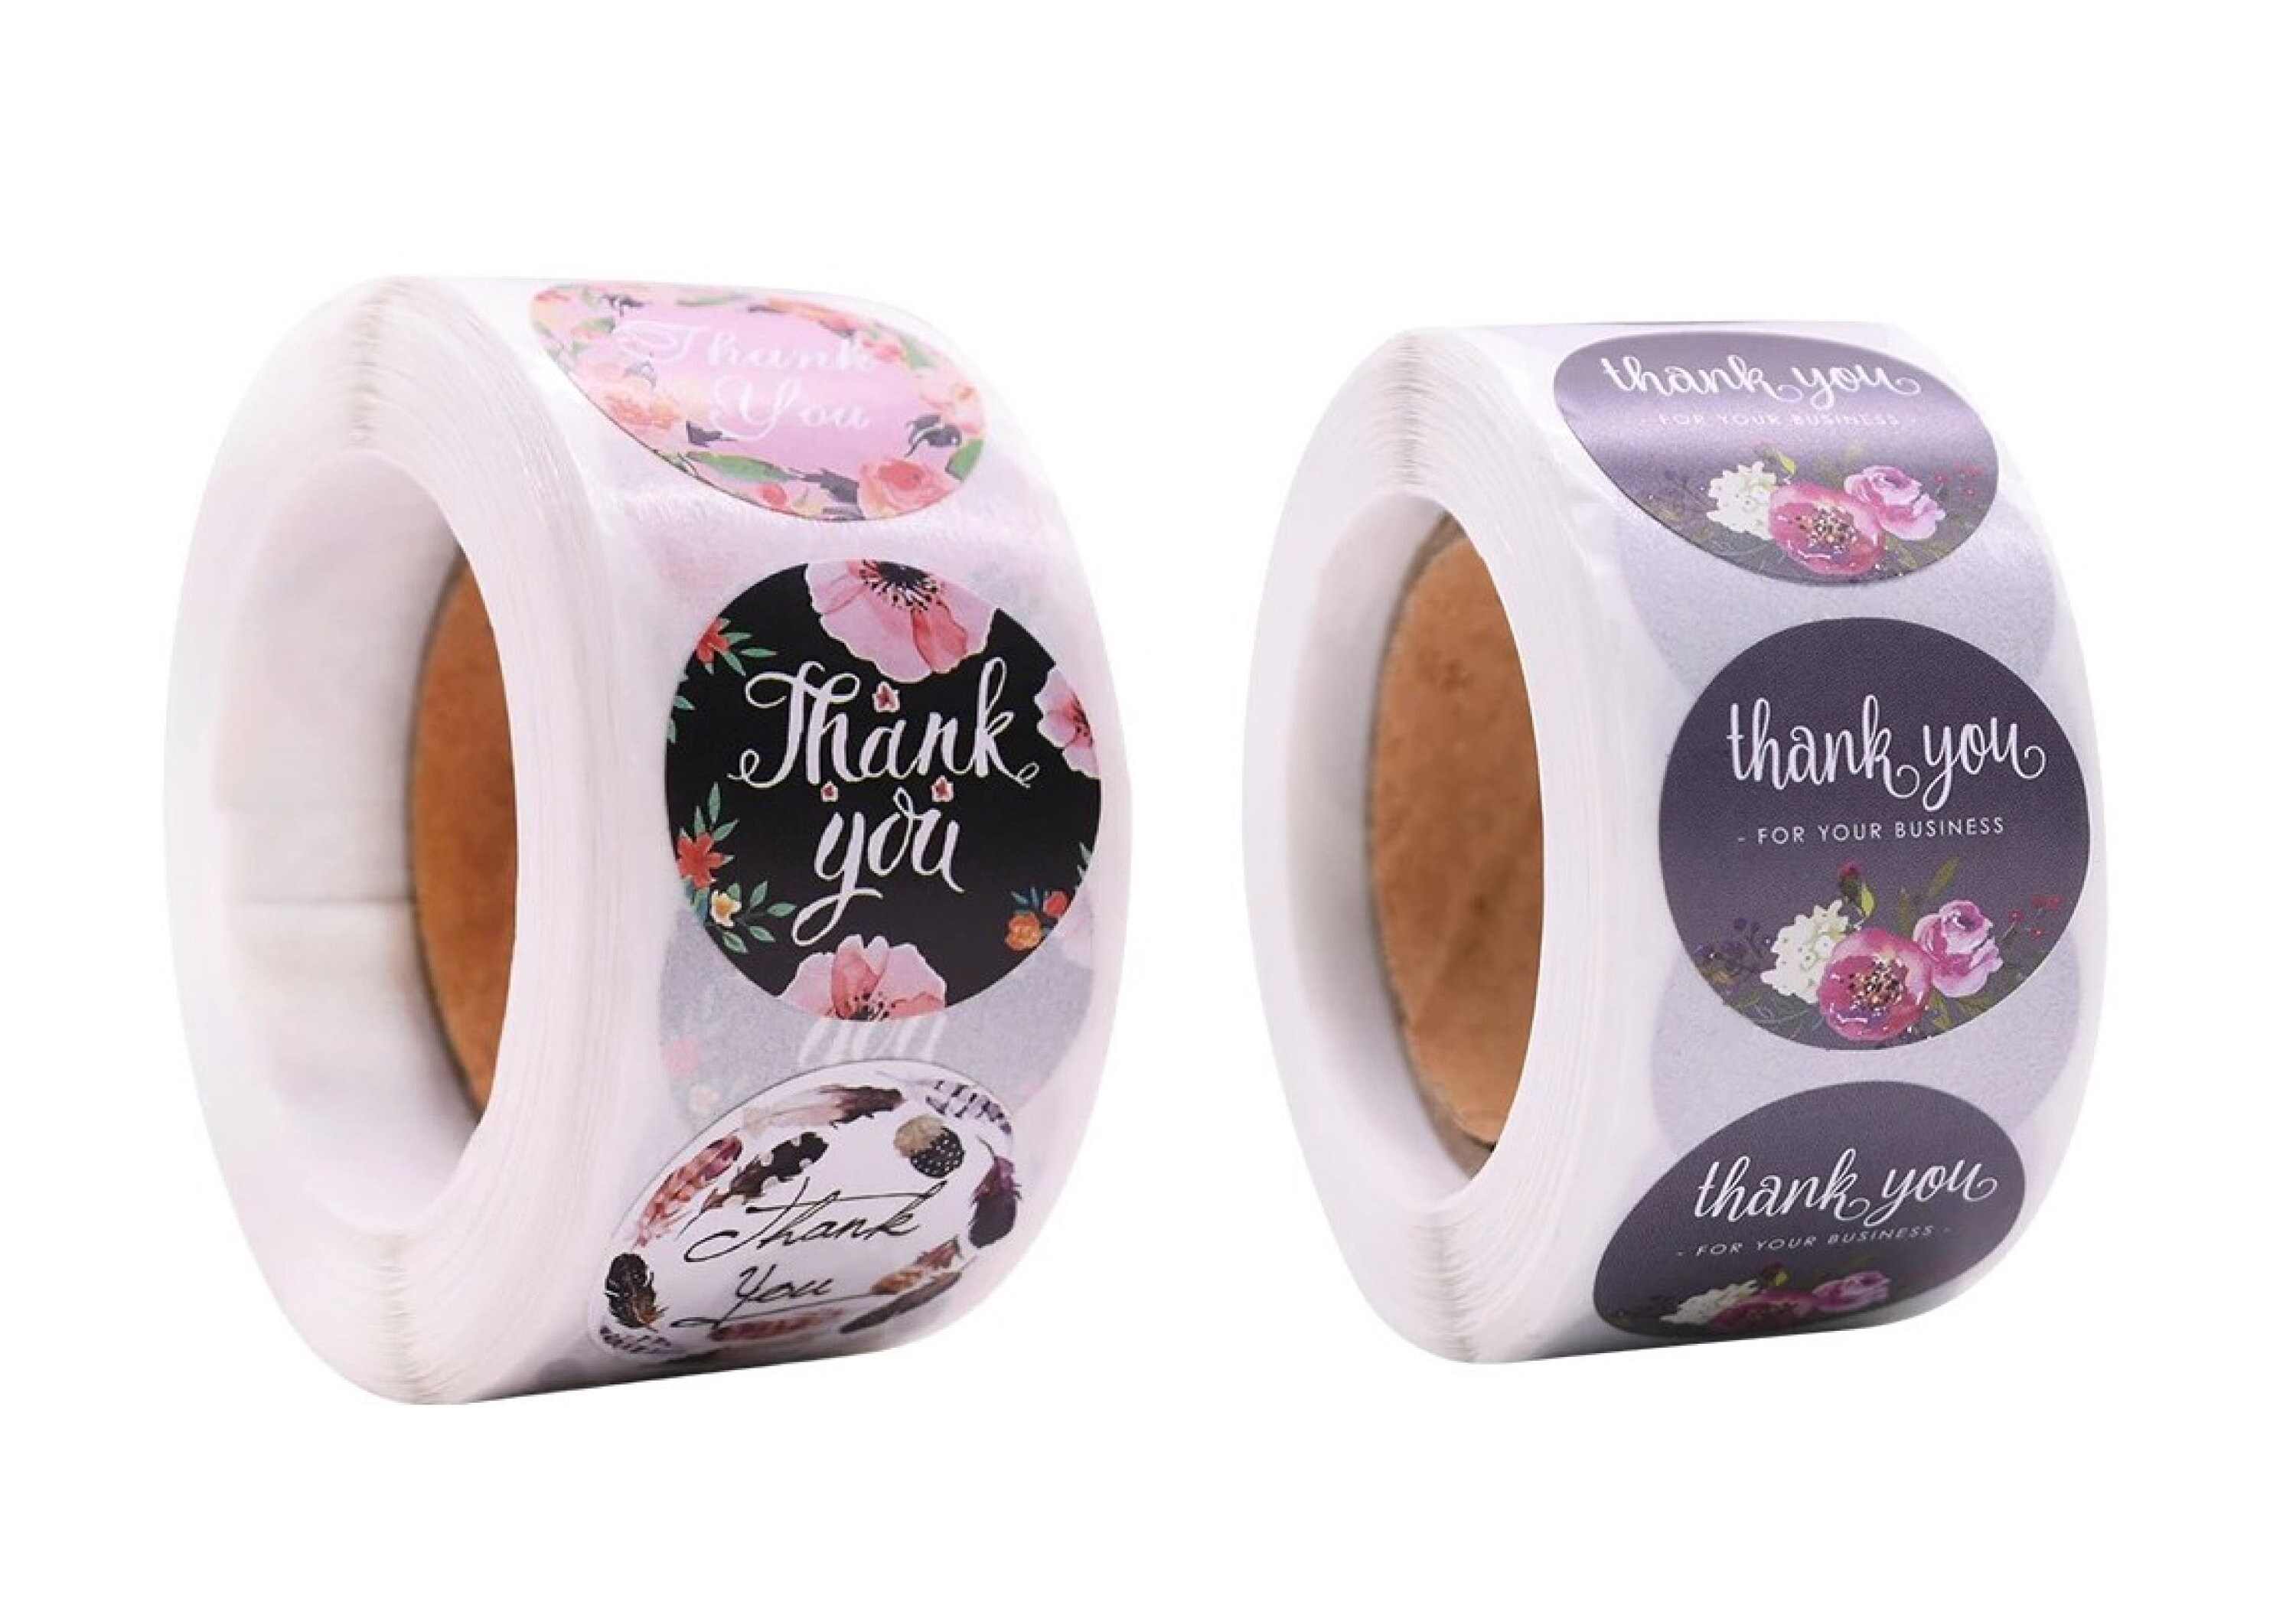 Unihom Flower Black Gift Packaging Set of 2, 1000 pcs Customer Mailer & Retail Bag 2.5 cm / 1 inch Small Self Adhesive Label Roll Boutique Supplies for Business Letter Thank You Stickers Roll 